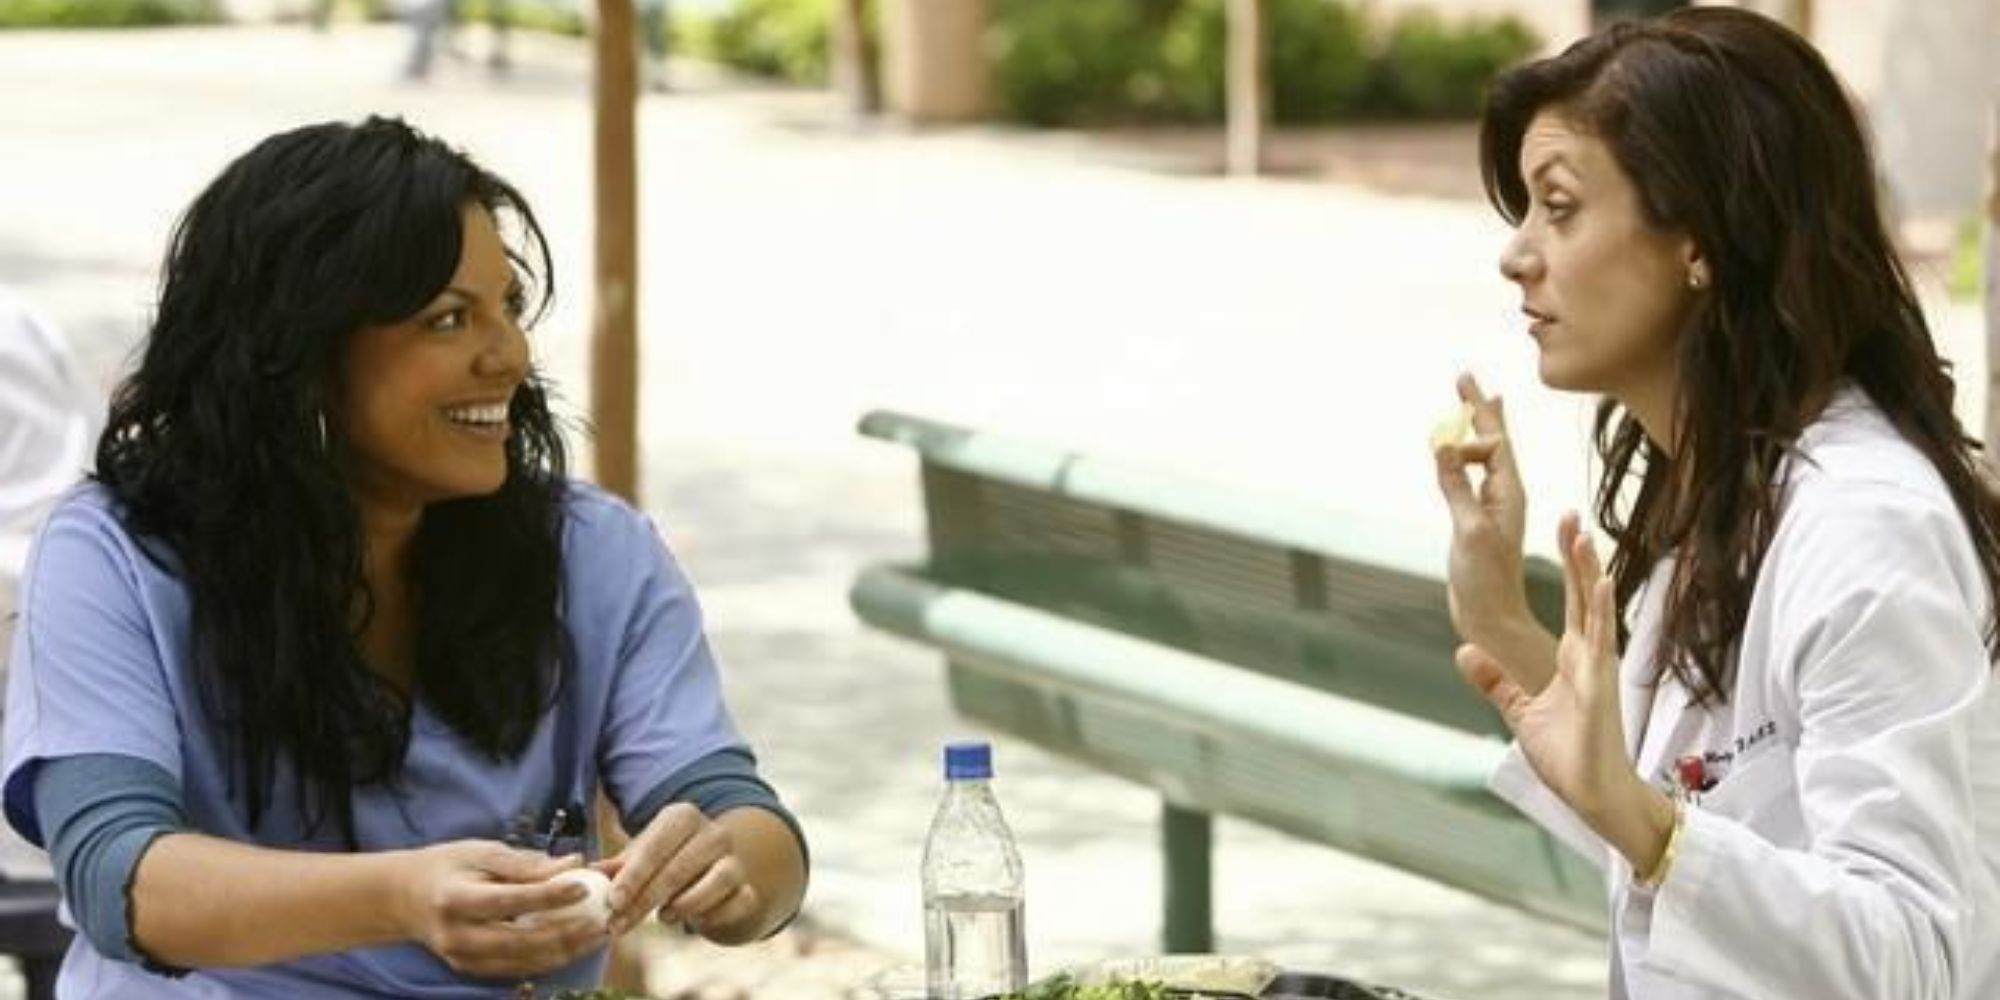 Two women are talking and laughing during lunch